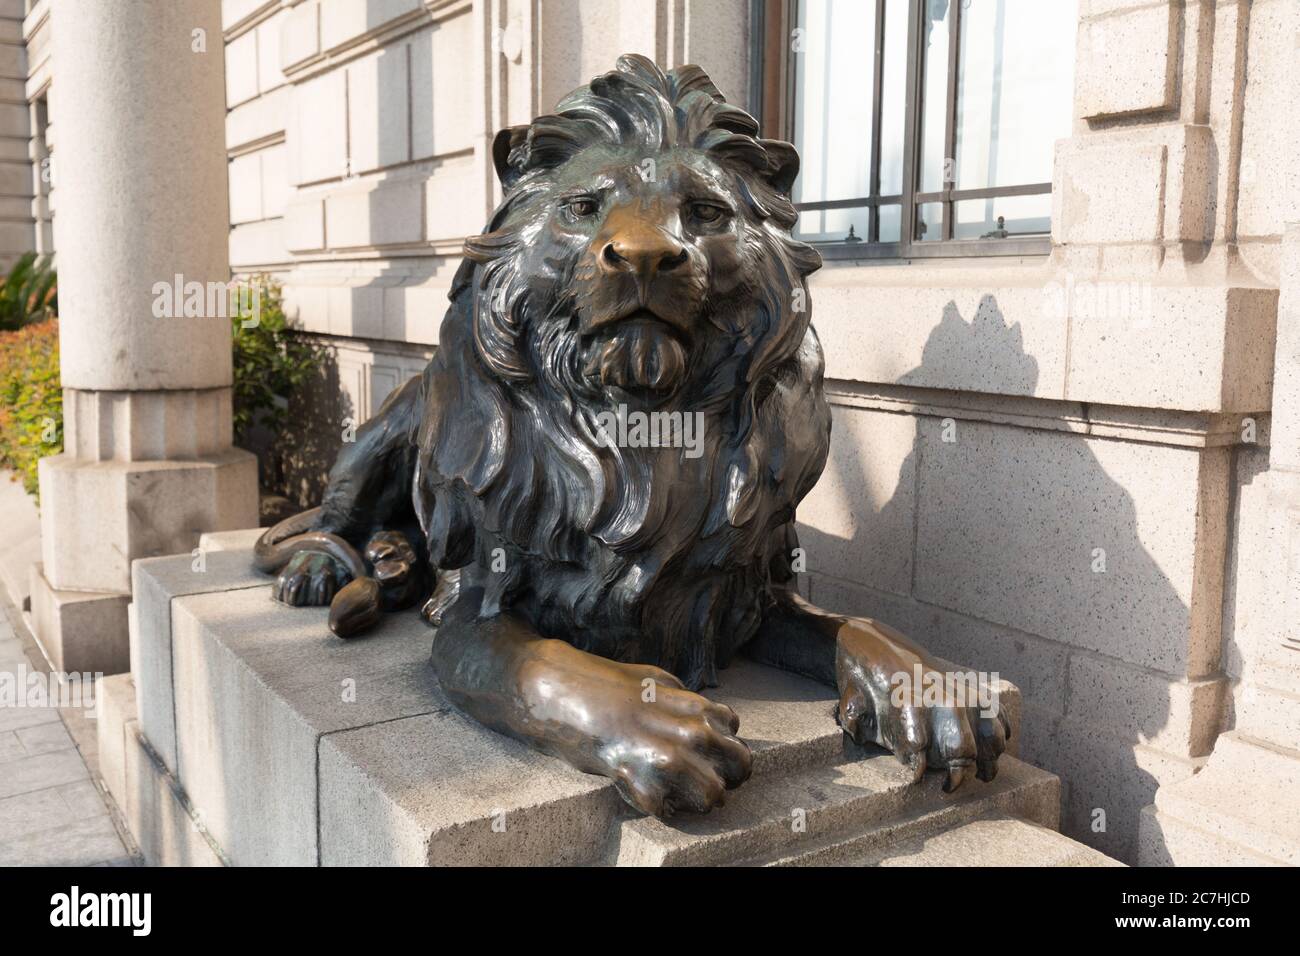 Lion sculpture guarding the entrance of the HSBC building at The Bund. Stock Photo